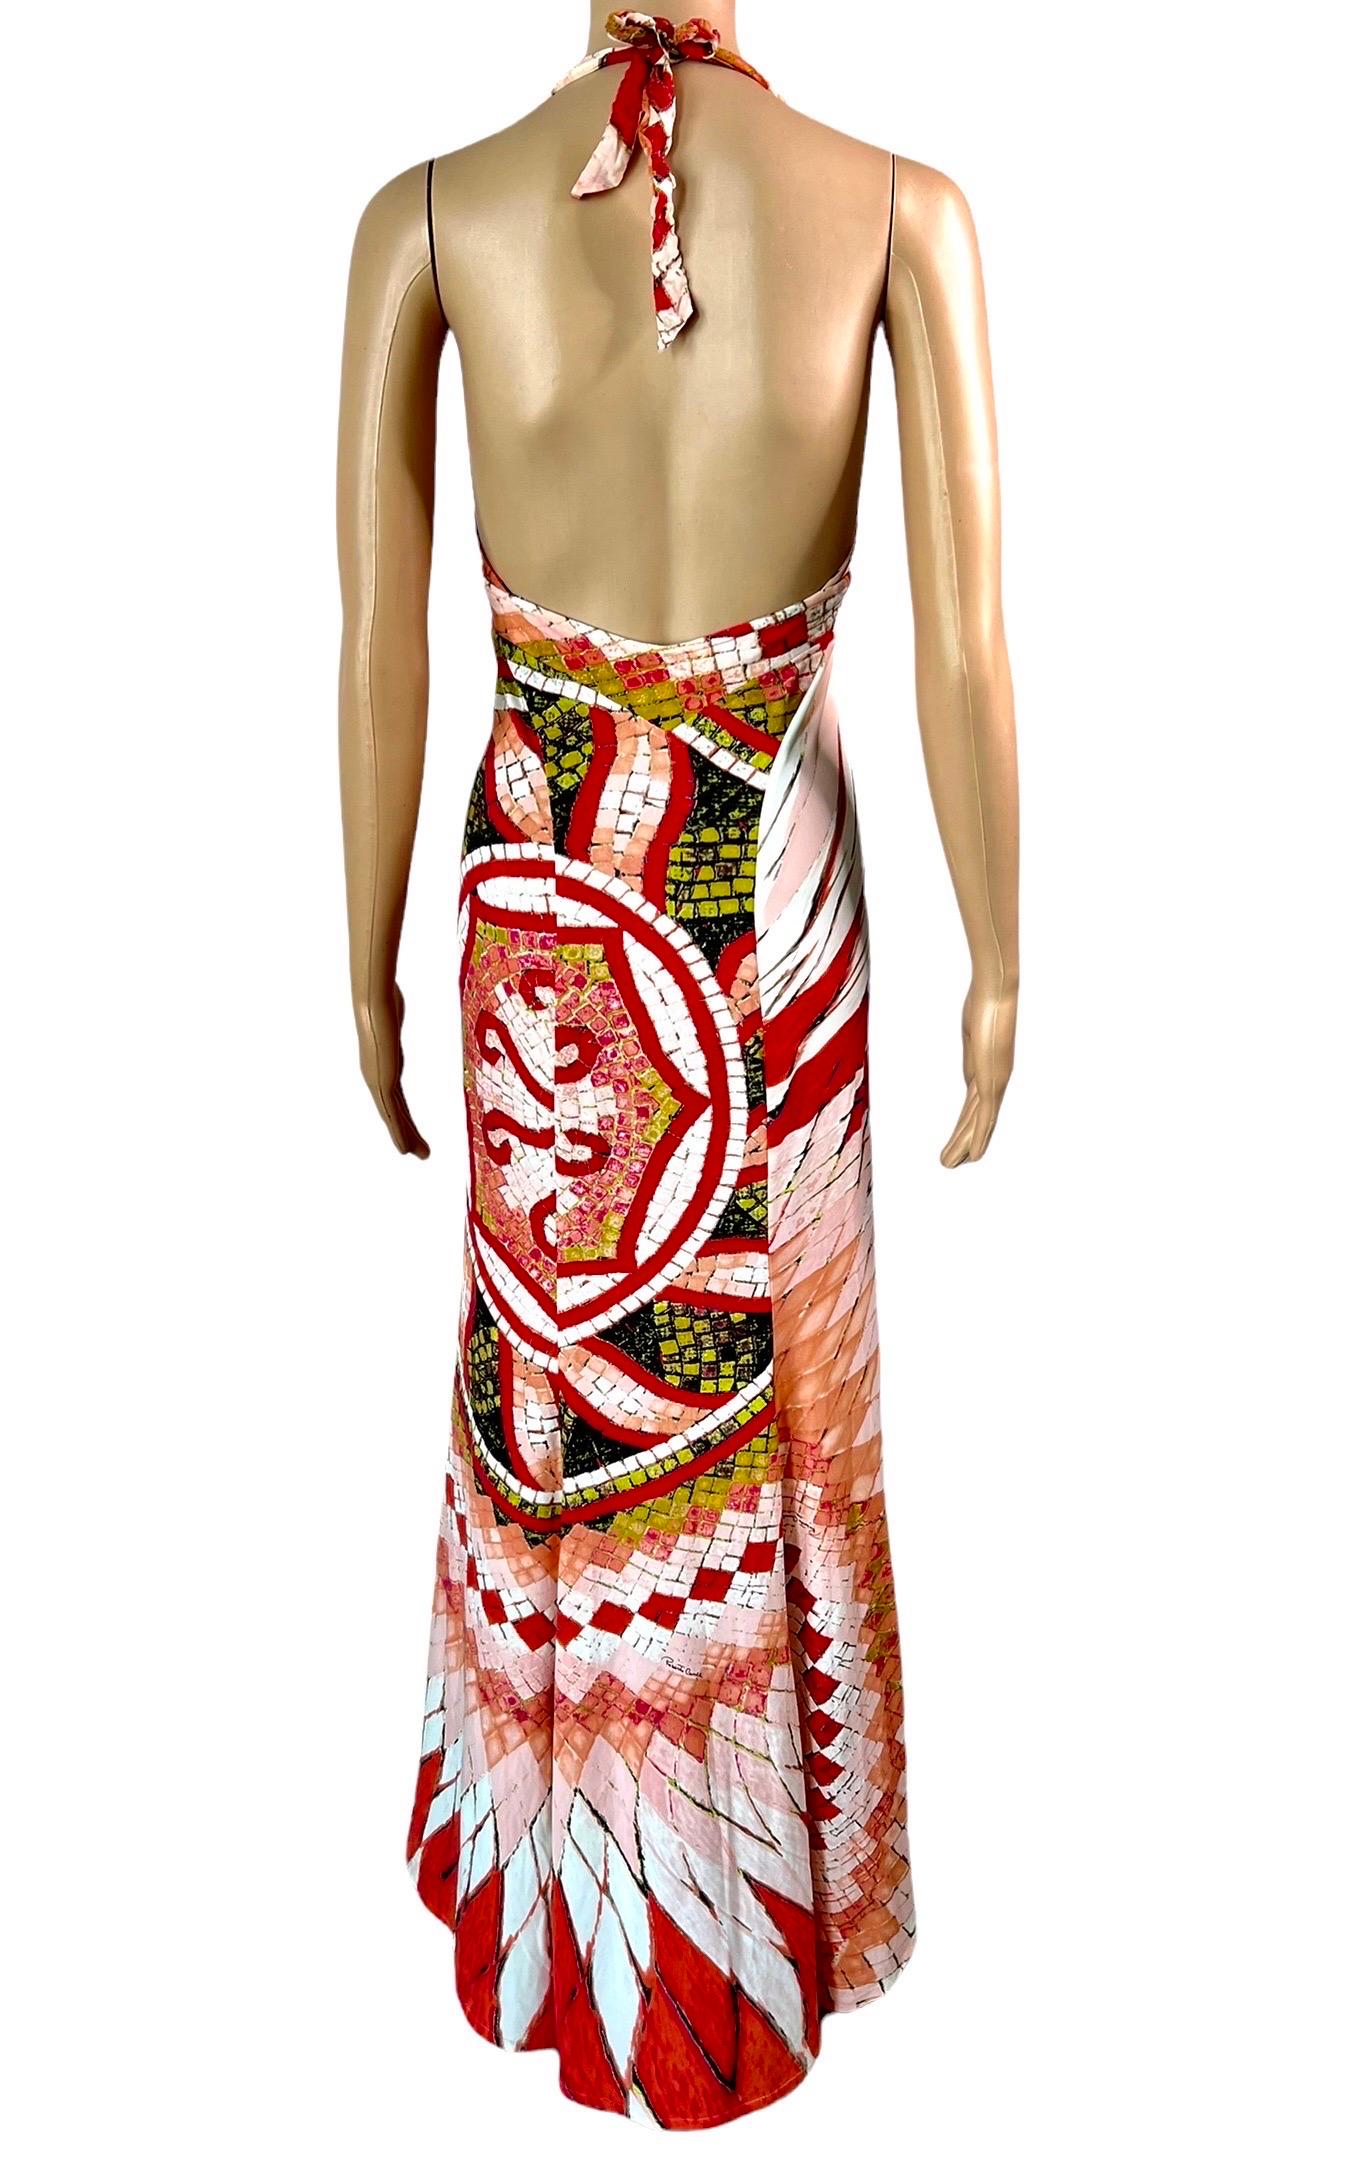 Roberto Cavalli S/S 2004 Plunging Neckline Backless Maxi Evening Dress Gown In Excellent Condition For Sale In Naples, FL